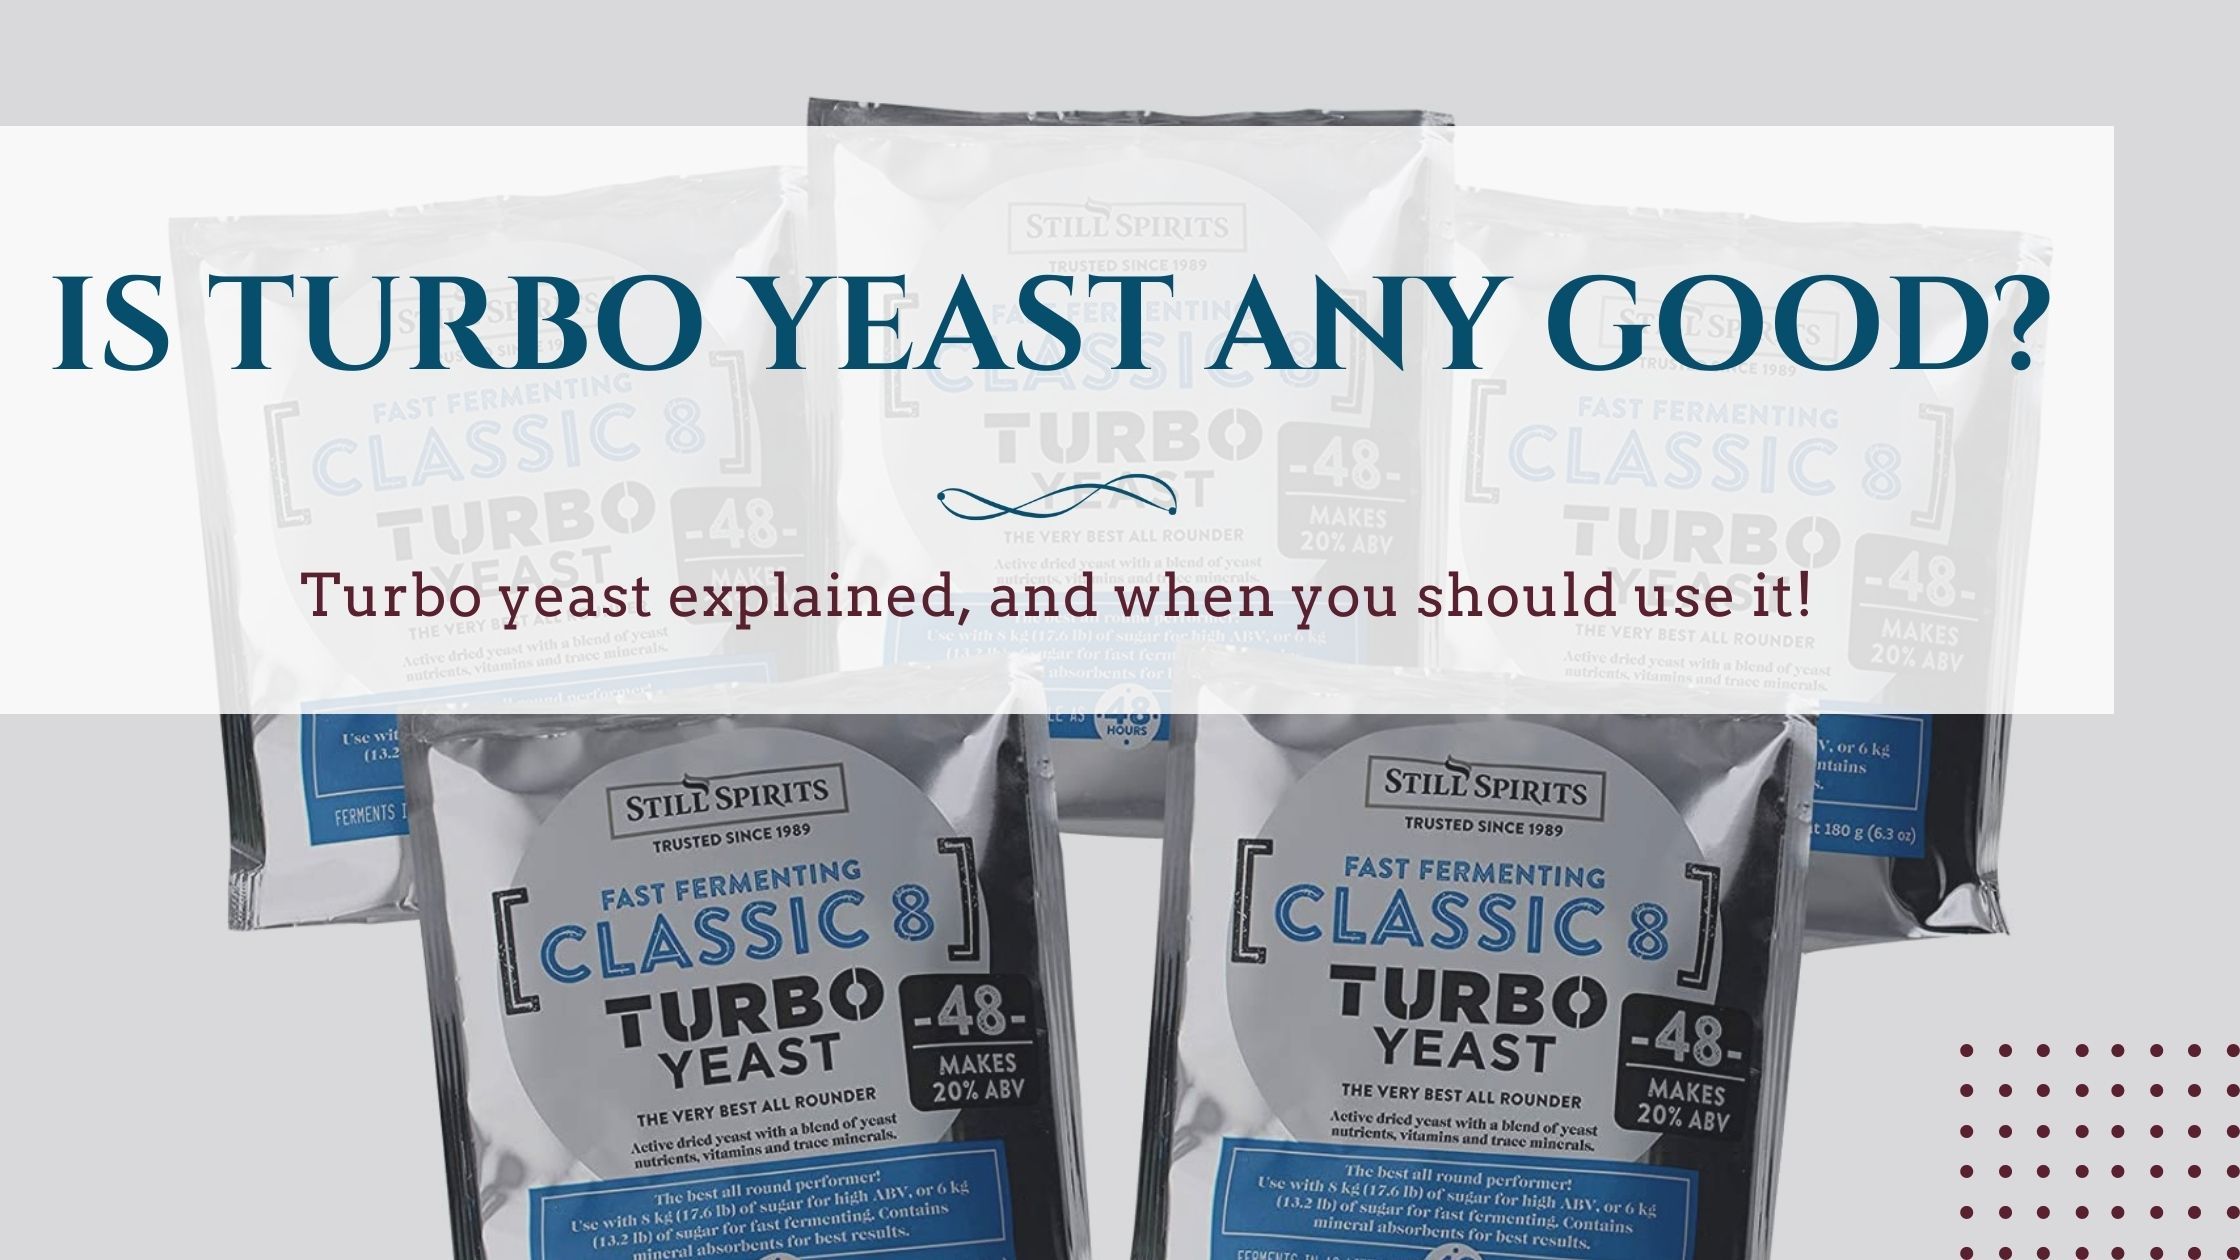 Image of diy distilling is turbo yeast any good